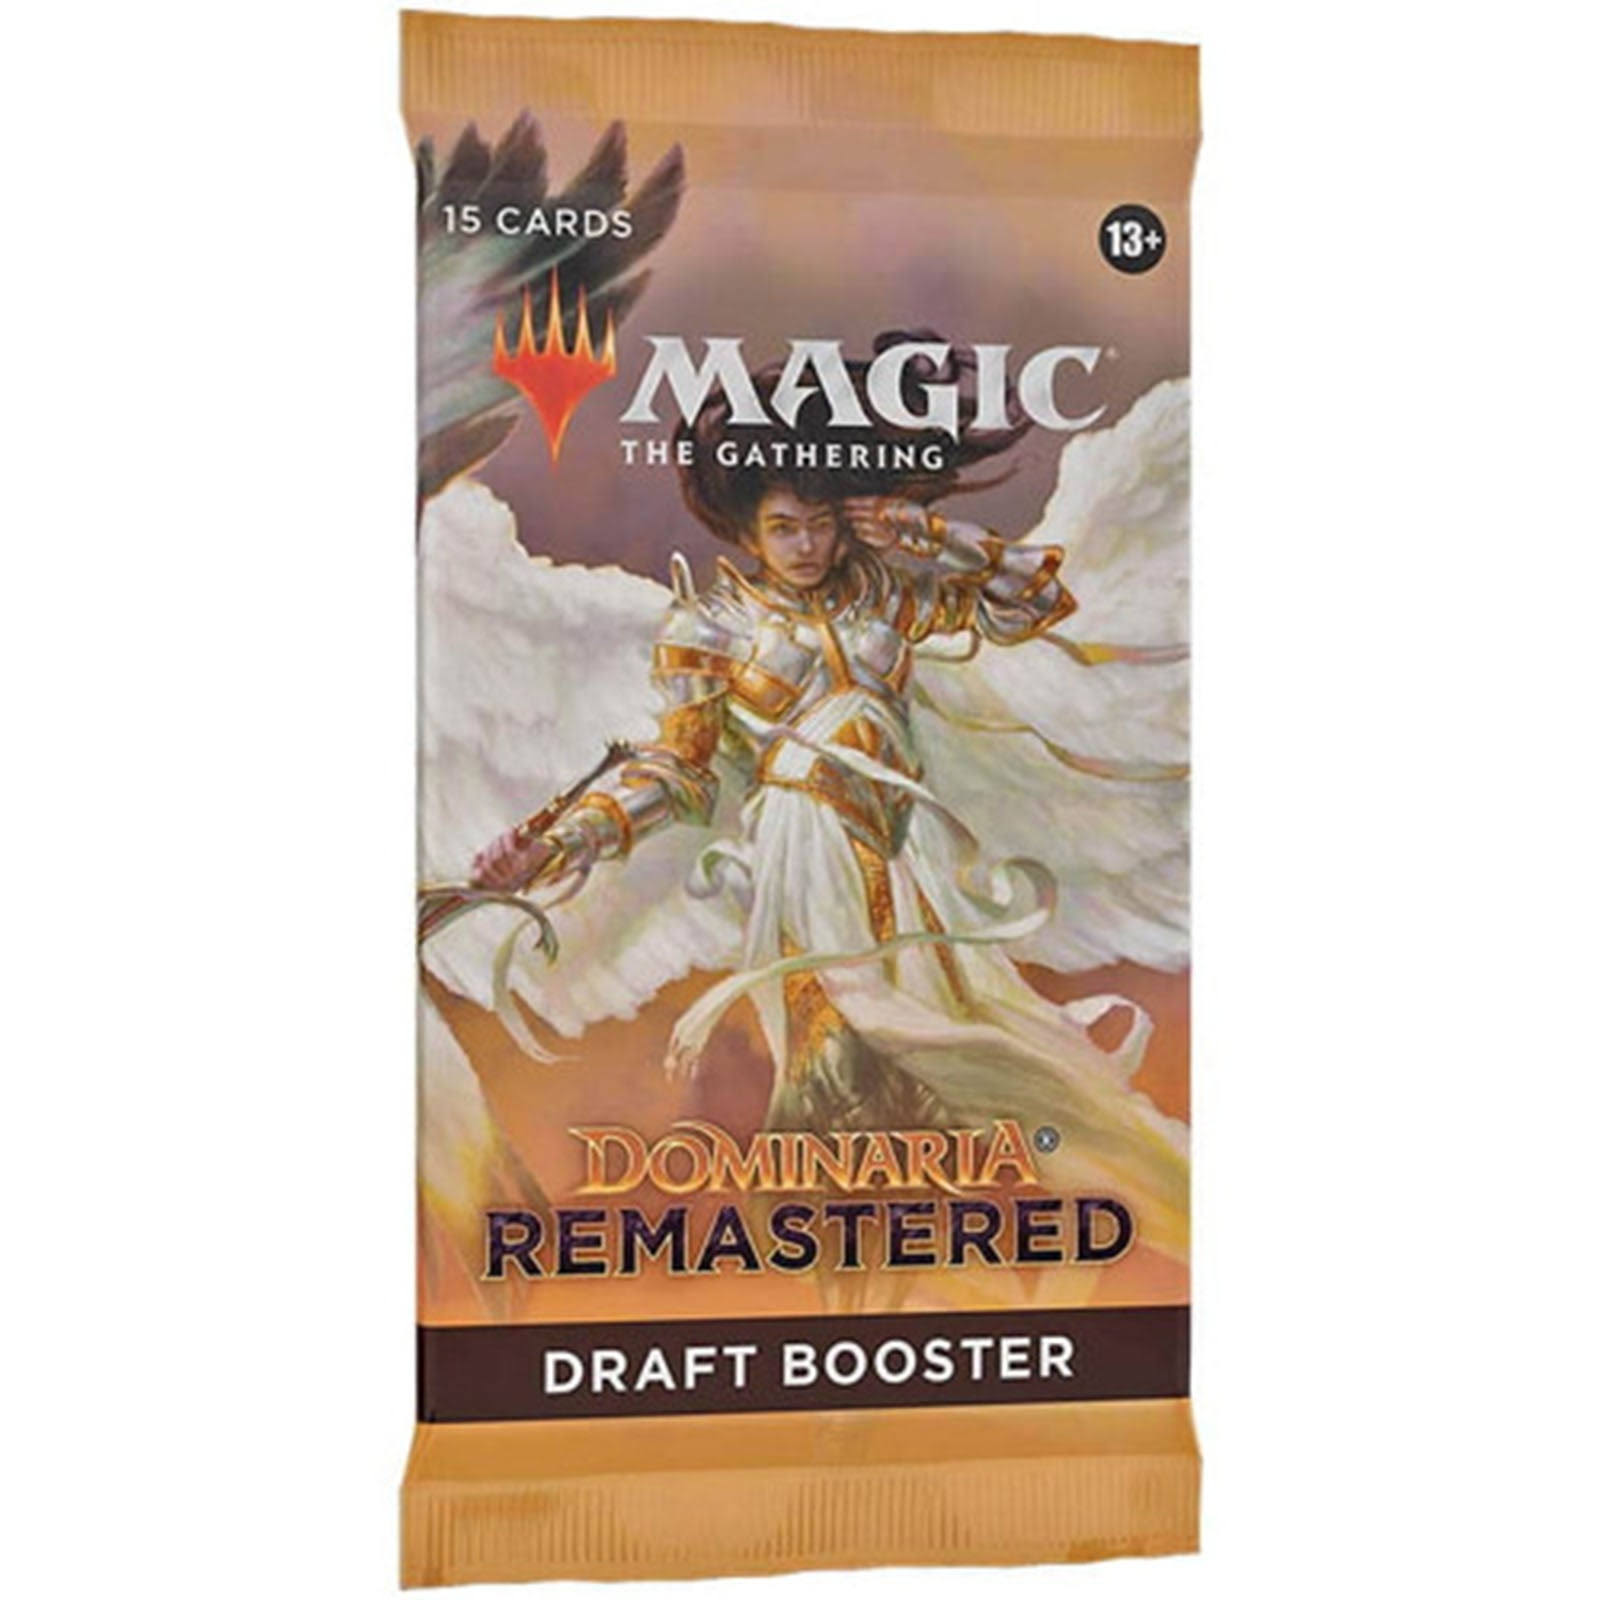 Magic The Gathering Dominaria Remastered Draft Booster Pack